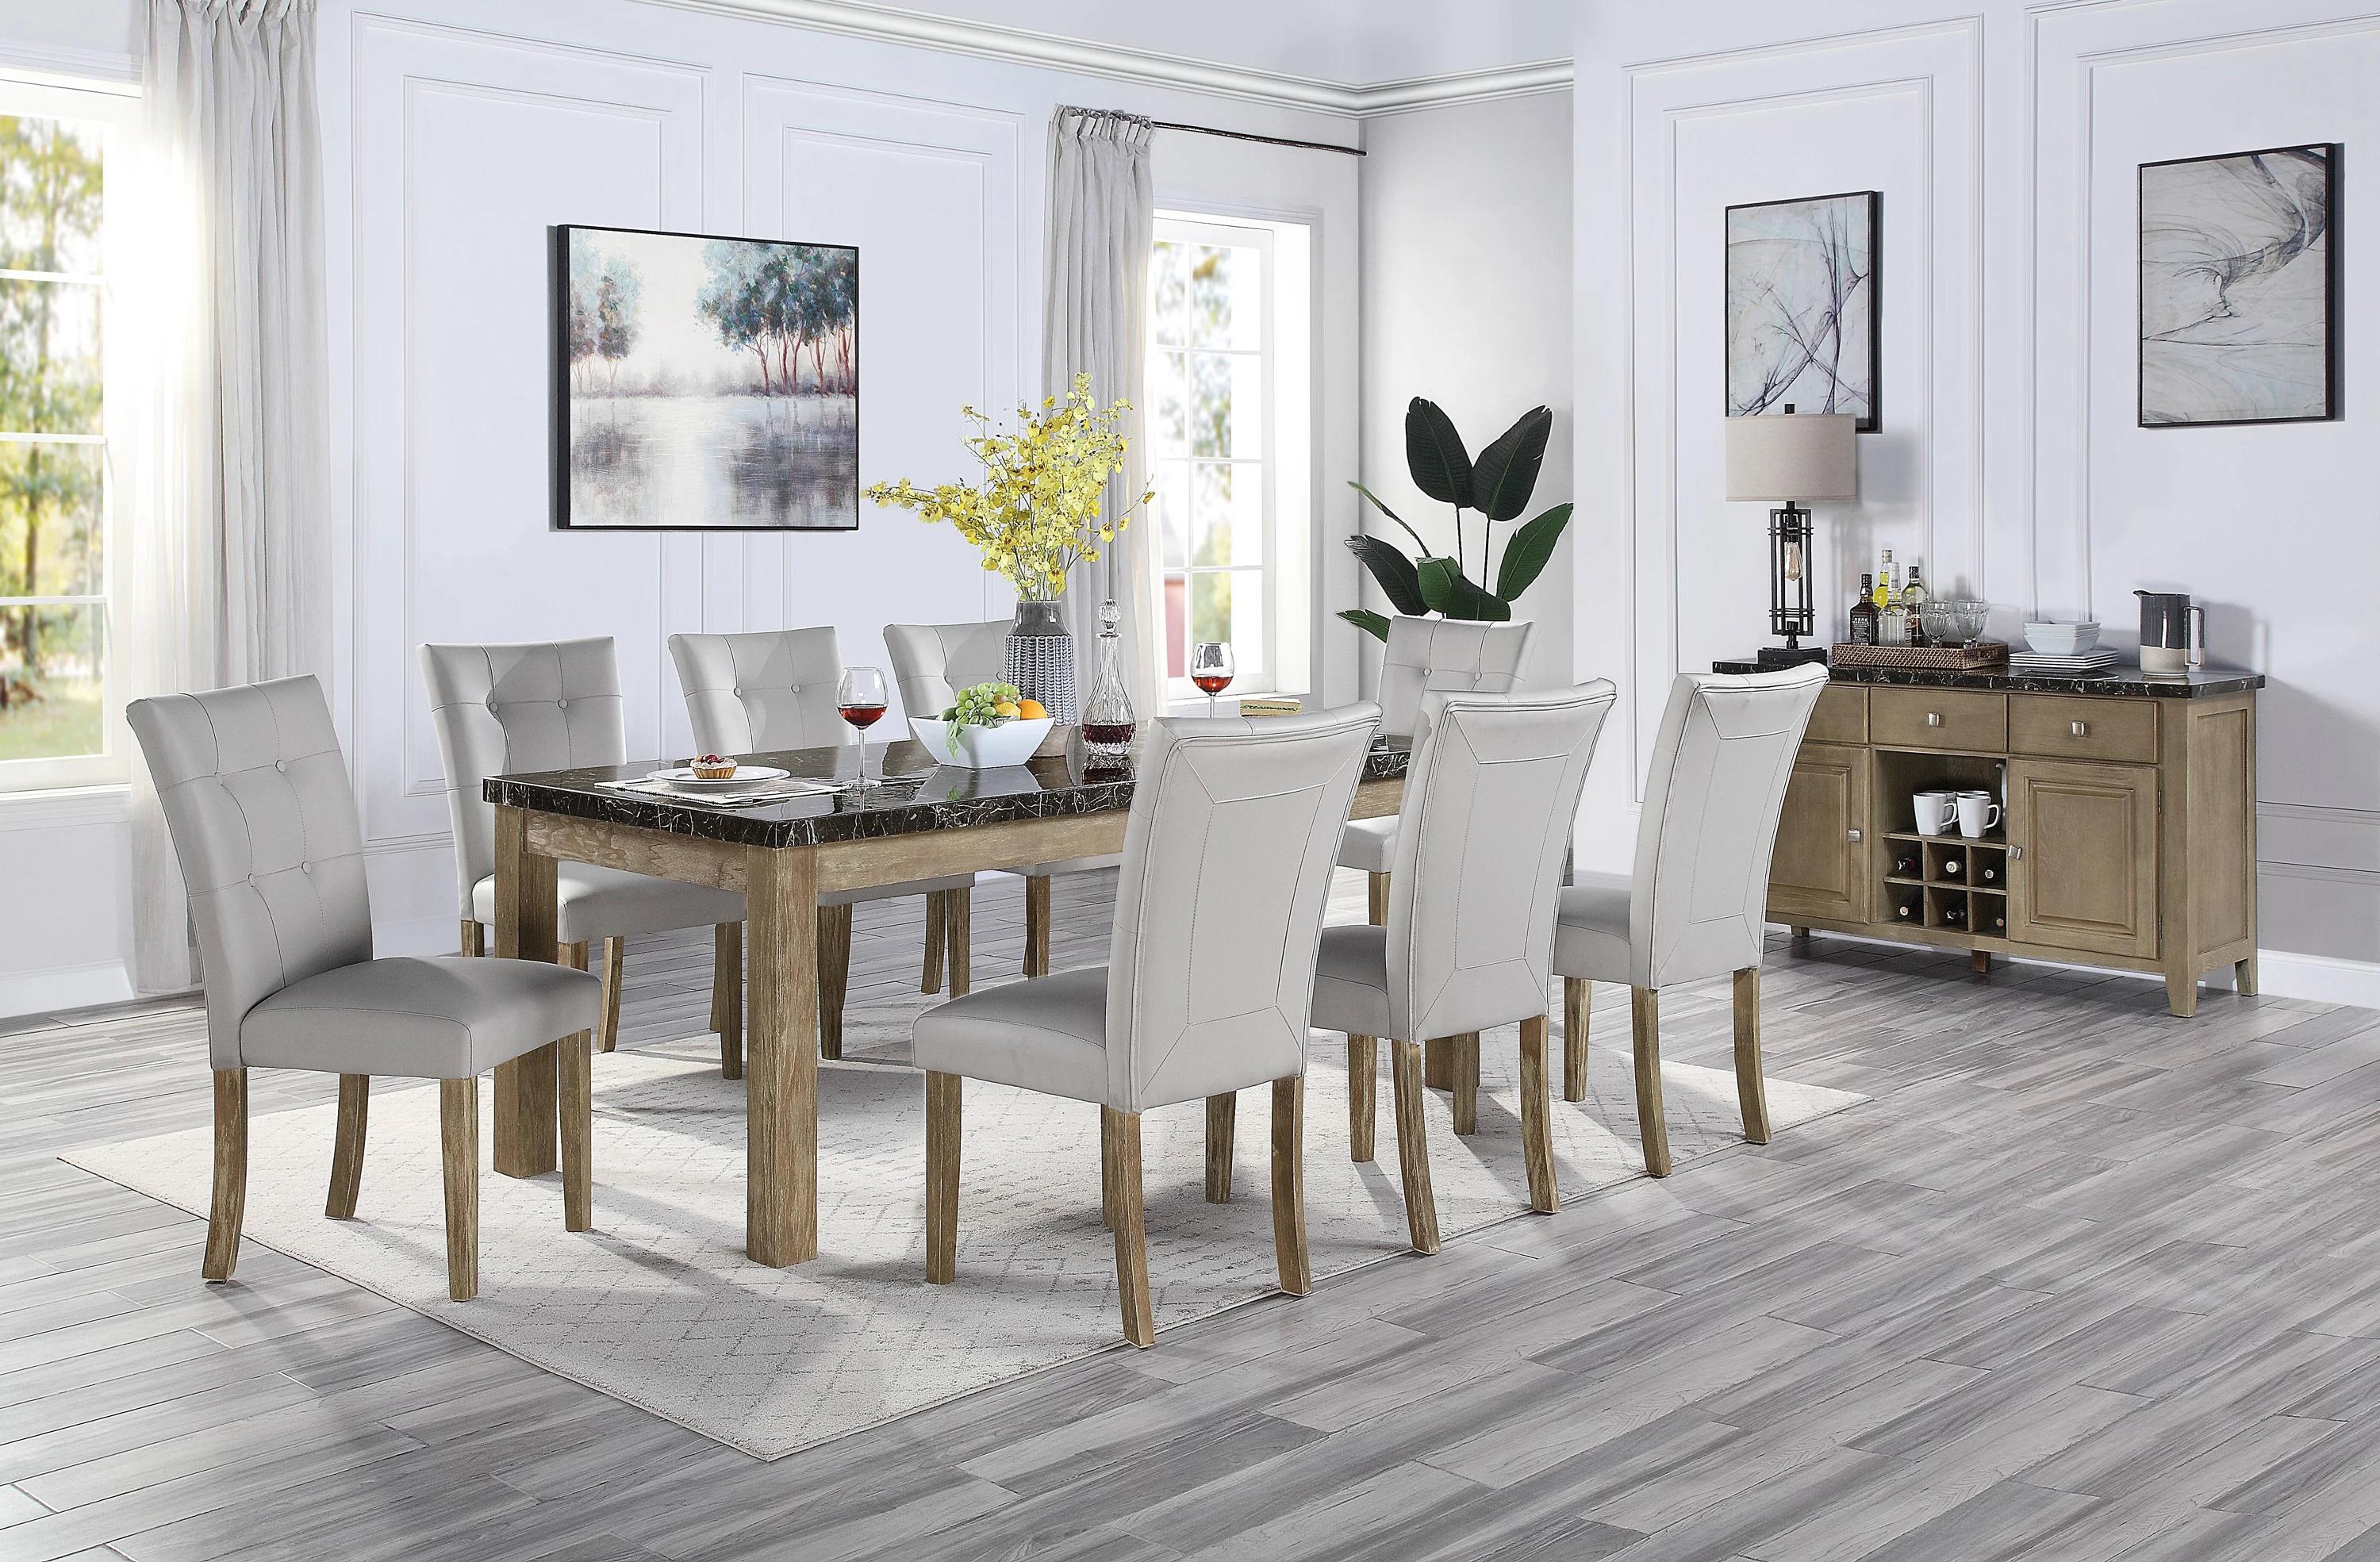 Transitional Dining Room Set Charnell DN00553-8pcs in Oak PU